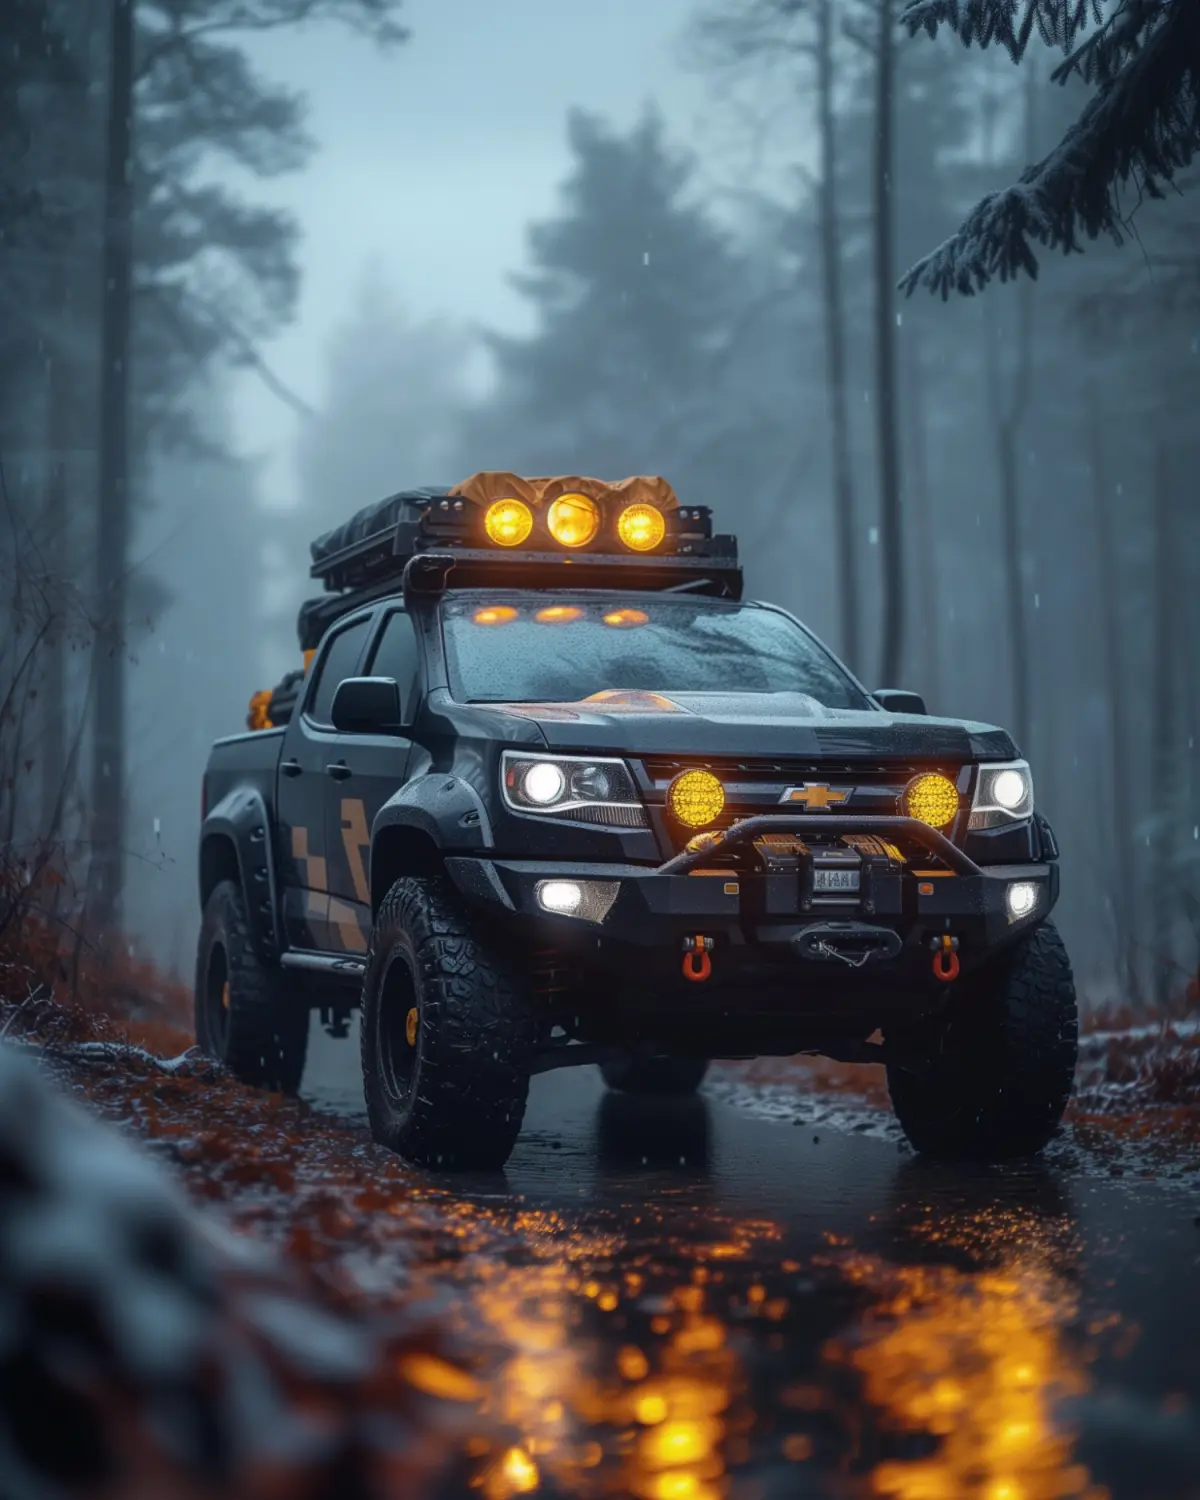 Tactical-themed Chevy Colorado equipped for outdoor adventures in the wilderness